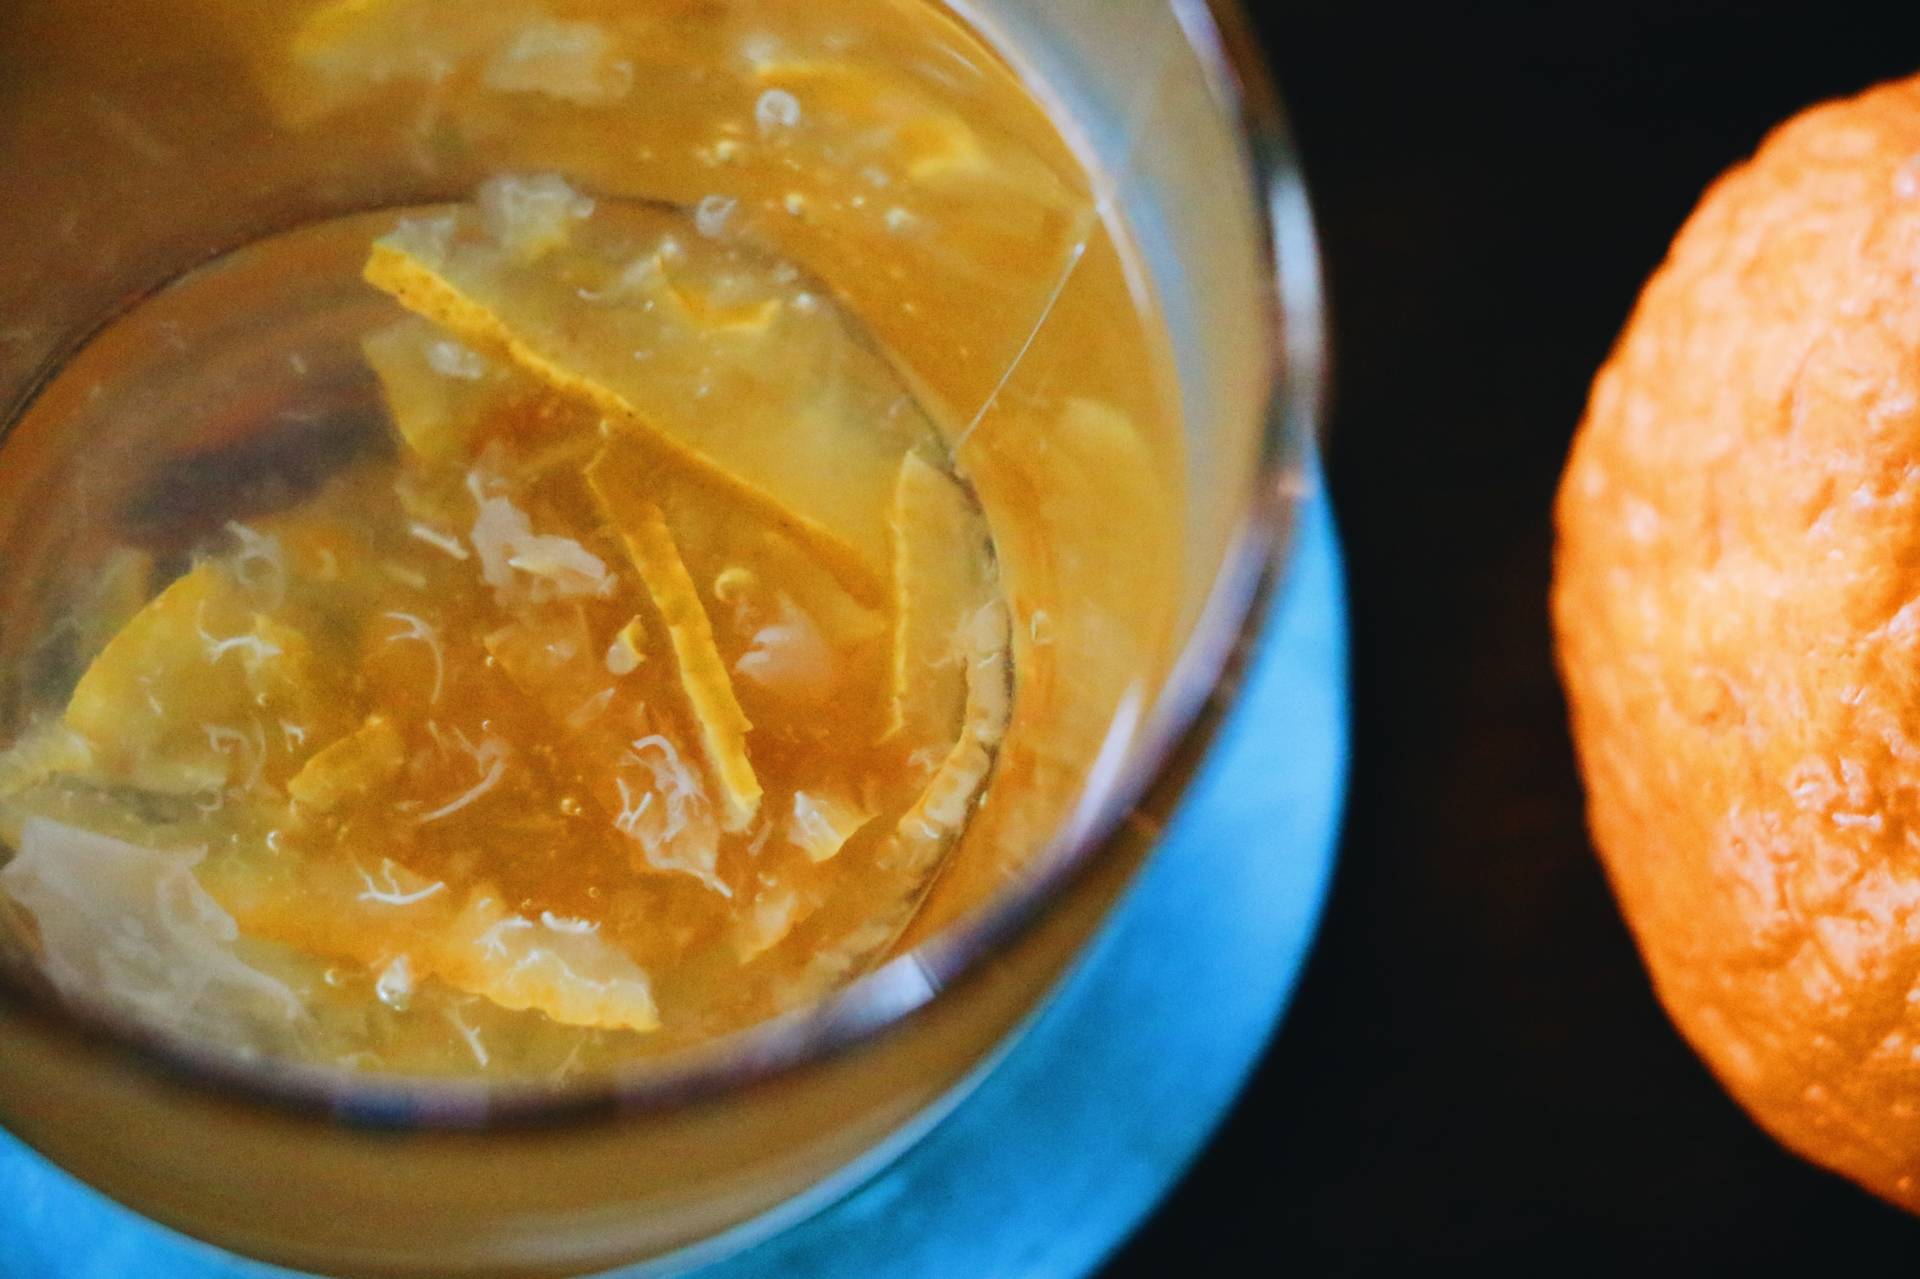 Yuja-cha (유자차), or yuja tea, made with the yuja fruit, is especially high in vitamin C. The tea pictured was made with store-bought yuja marmalade.